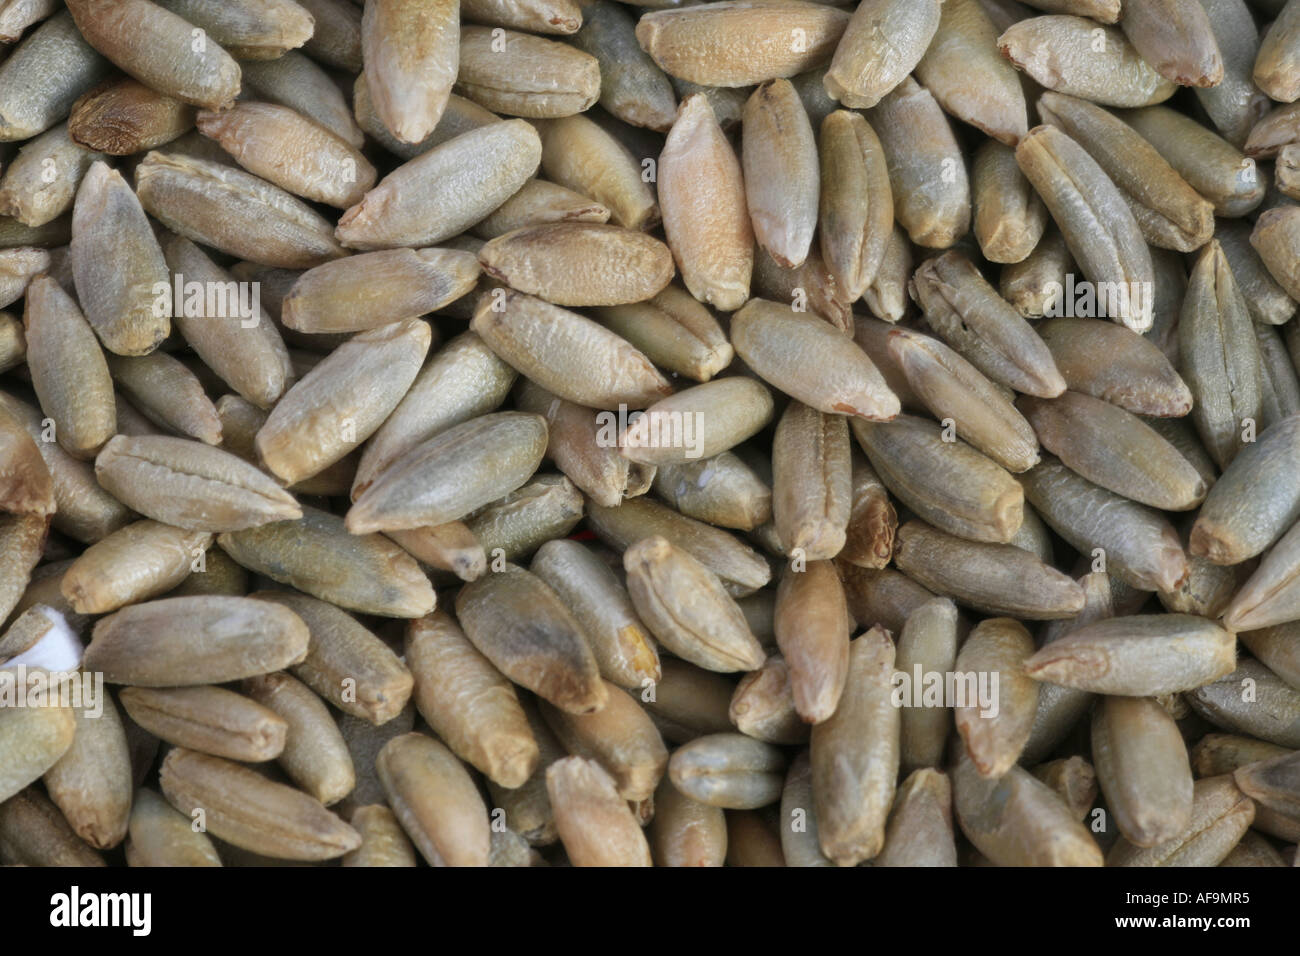 cultivated rye (Secale cereale), grains Stock Photo